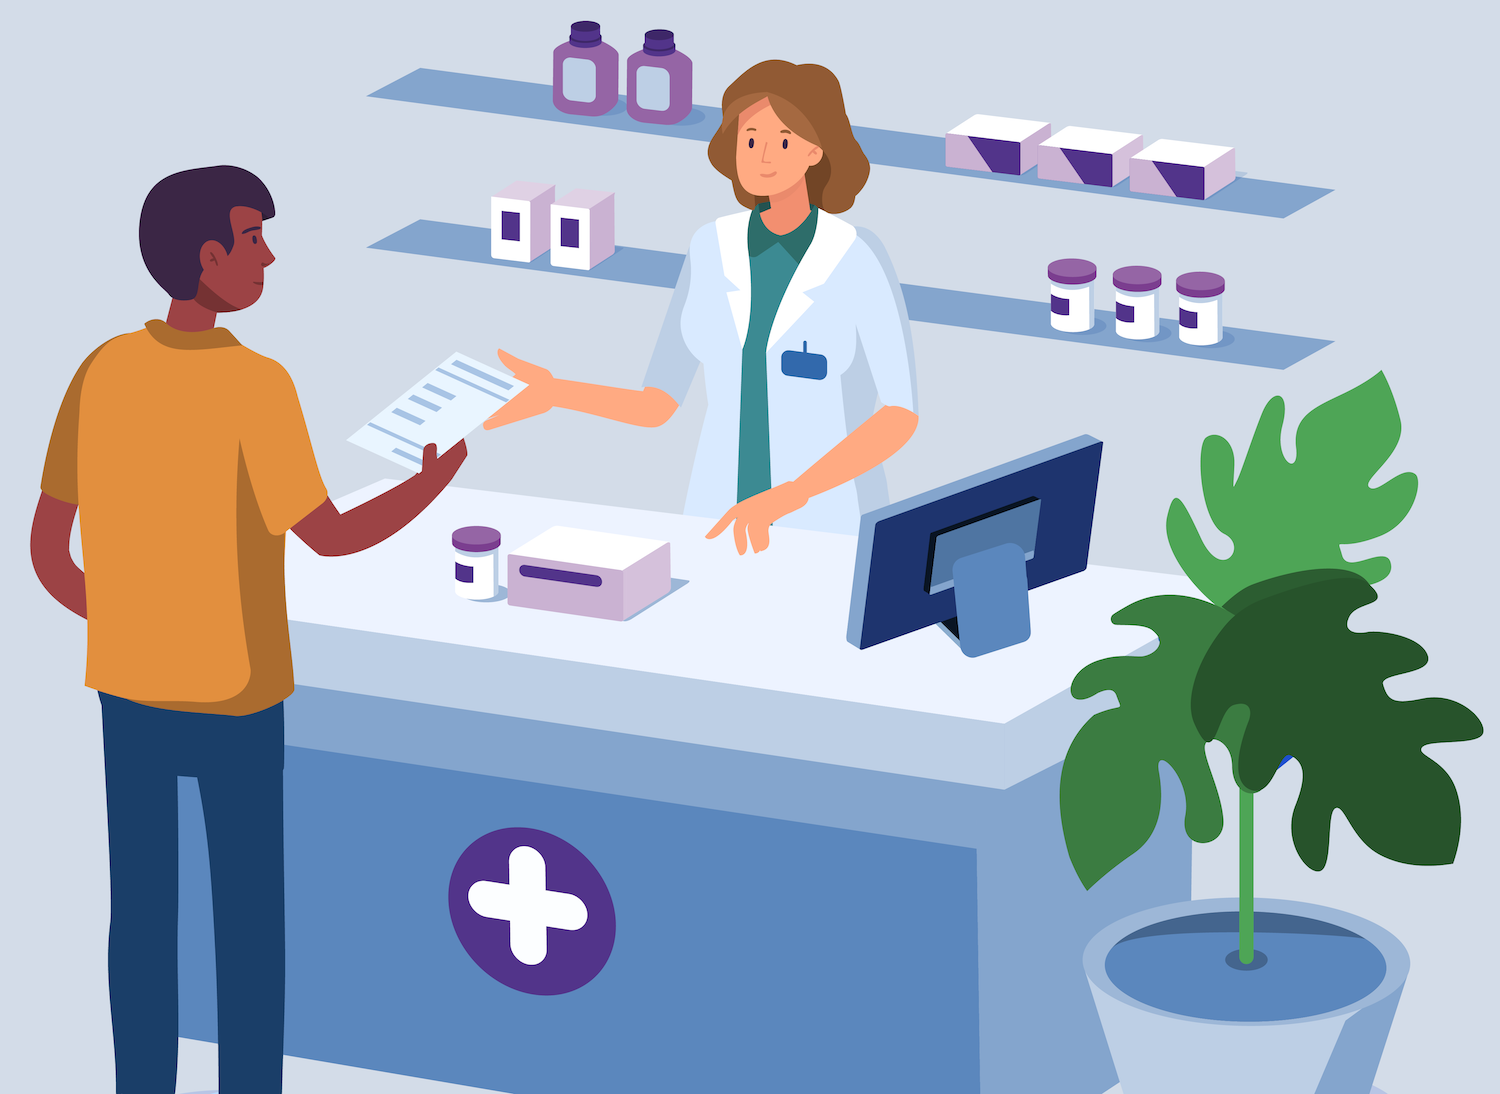 Patient at a pharmacy picking up a prescription from a pharmacist behind a counter